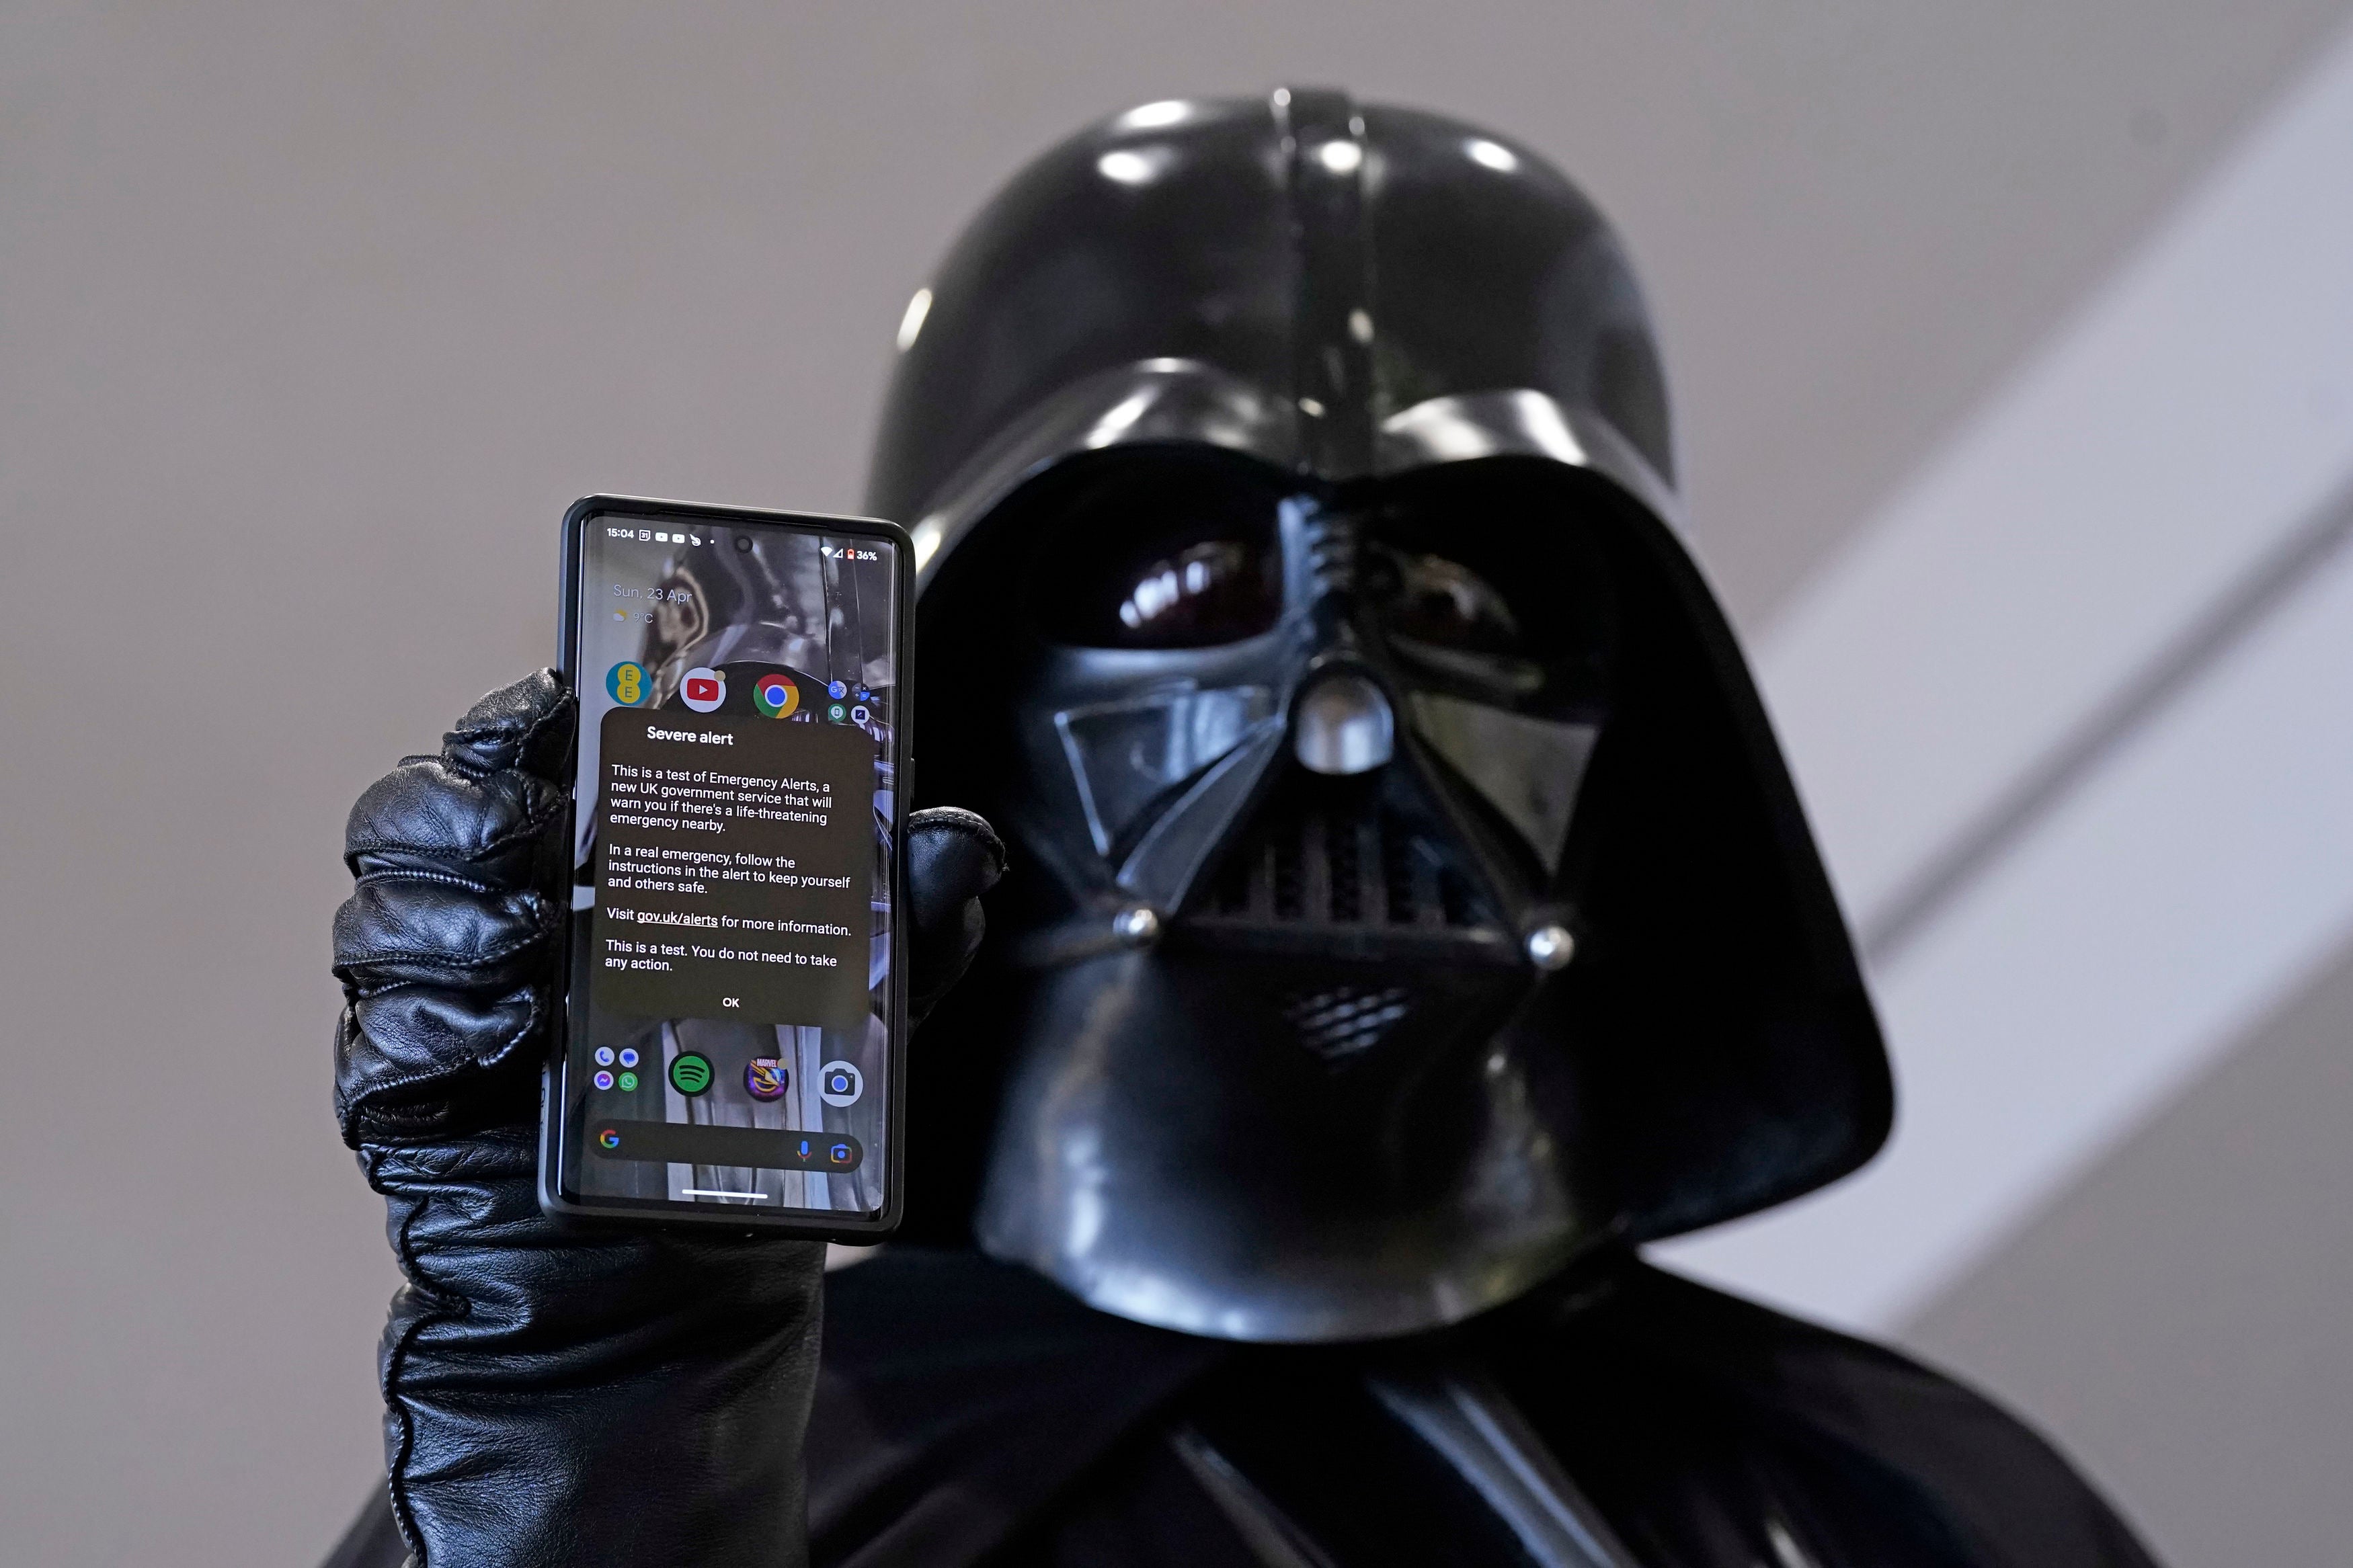 A cosplayer holds up his mobile phone as the test message is displayed during a sci-fi event in Scarborough